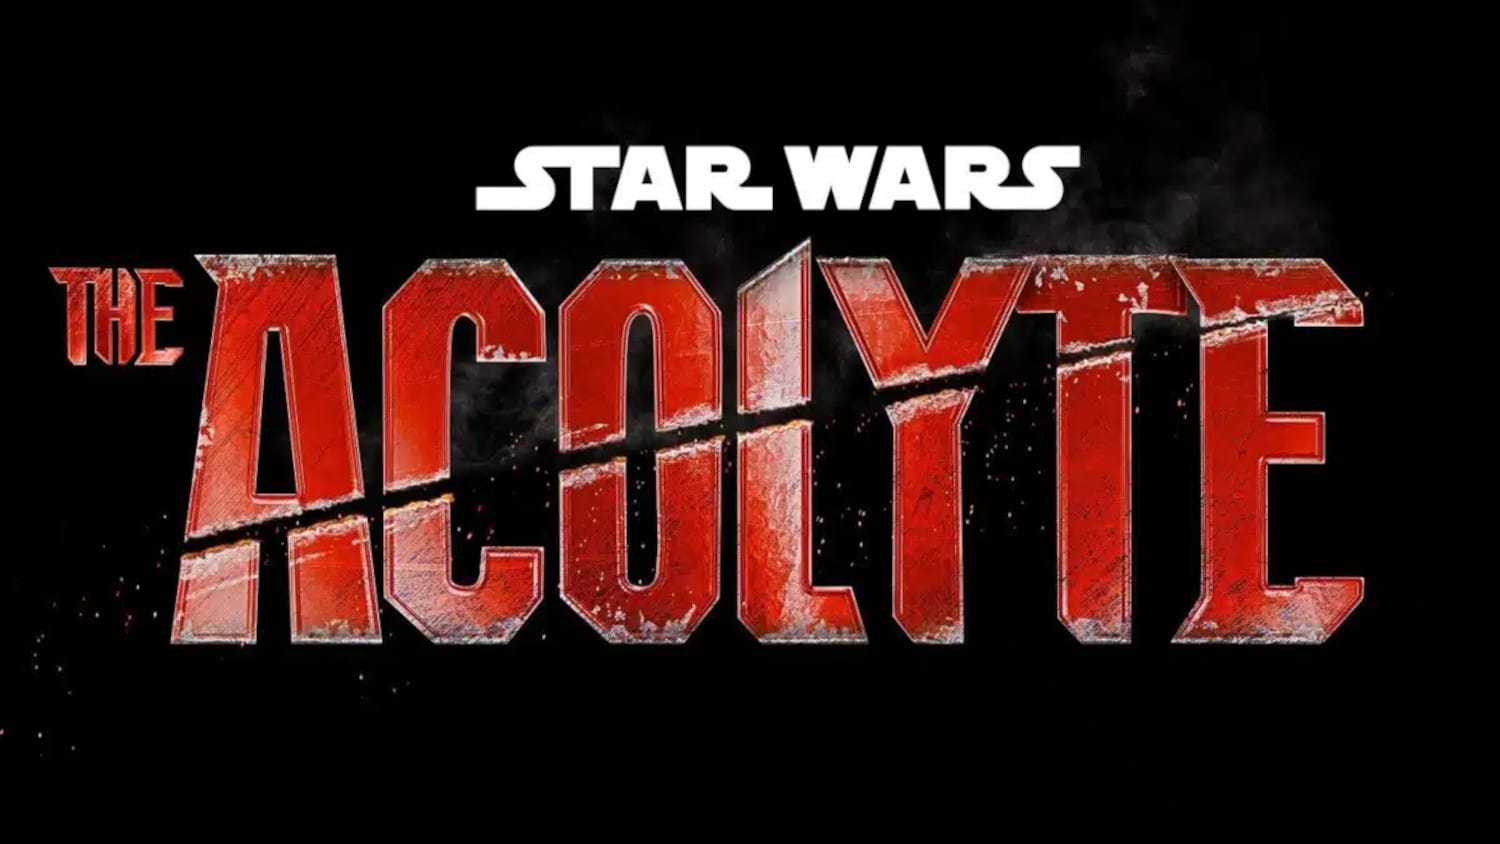 Star Wars: The Acolyte Trailer Claimed To Be On The Way